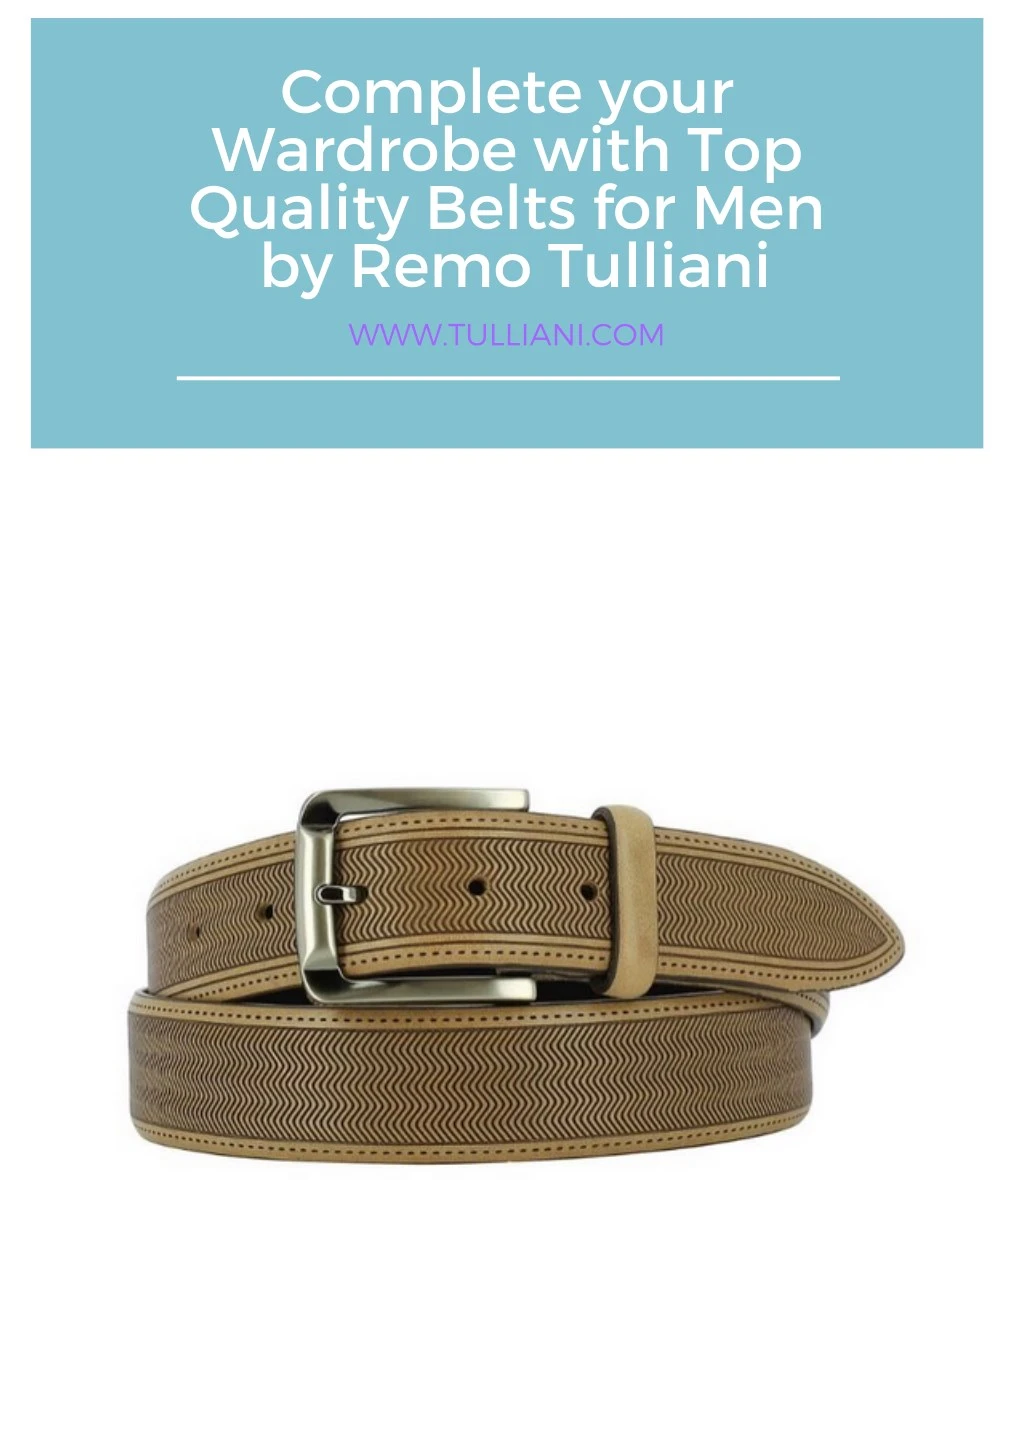 PPT - Complete your Wardrobe with Top Quality Belts for Men by Remo ...